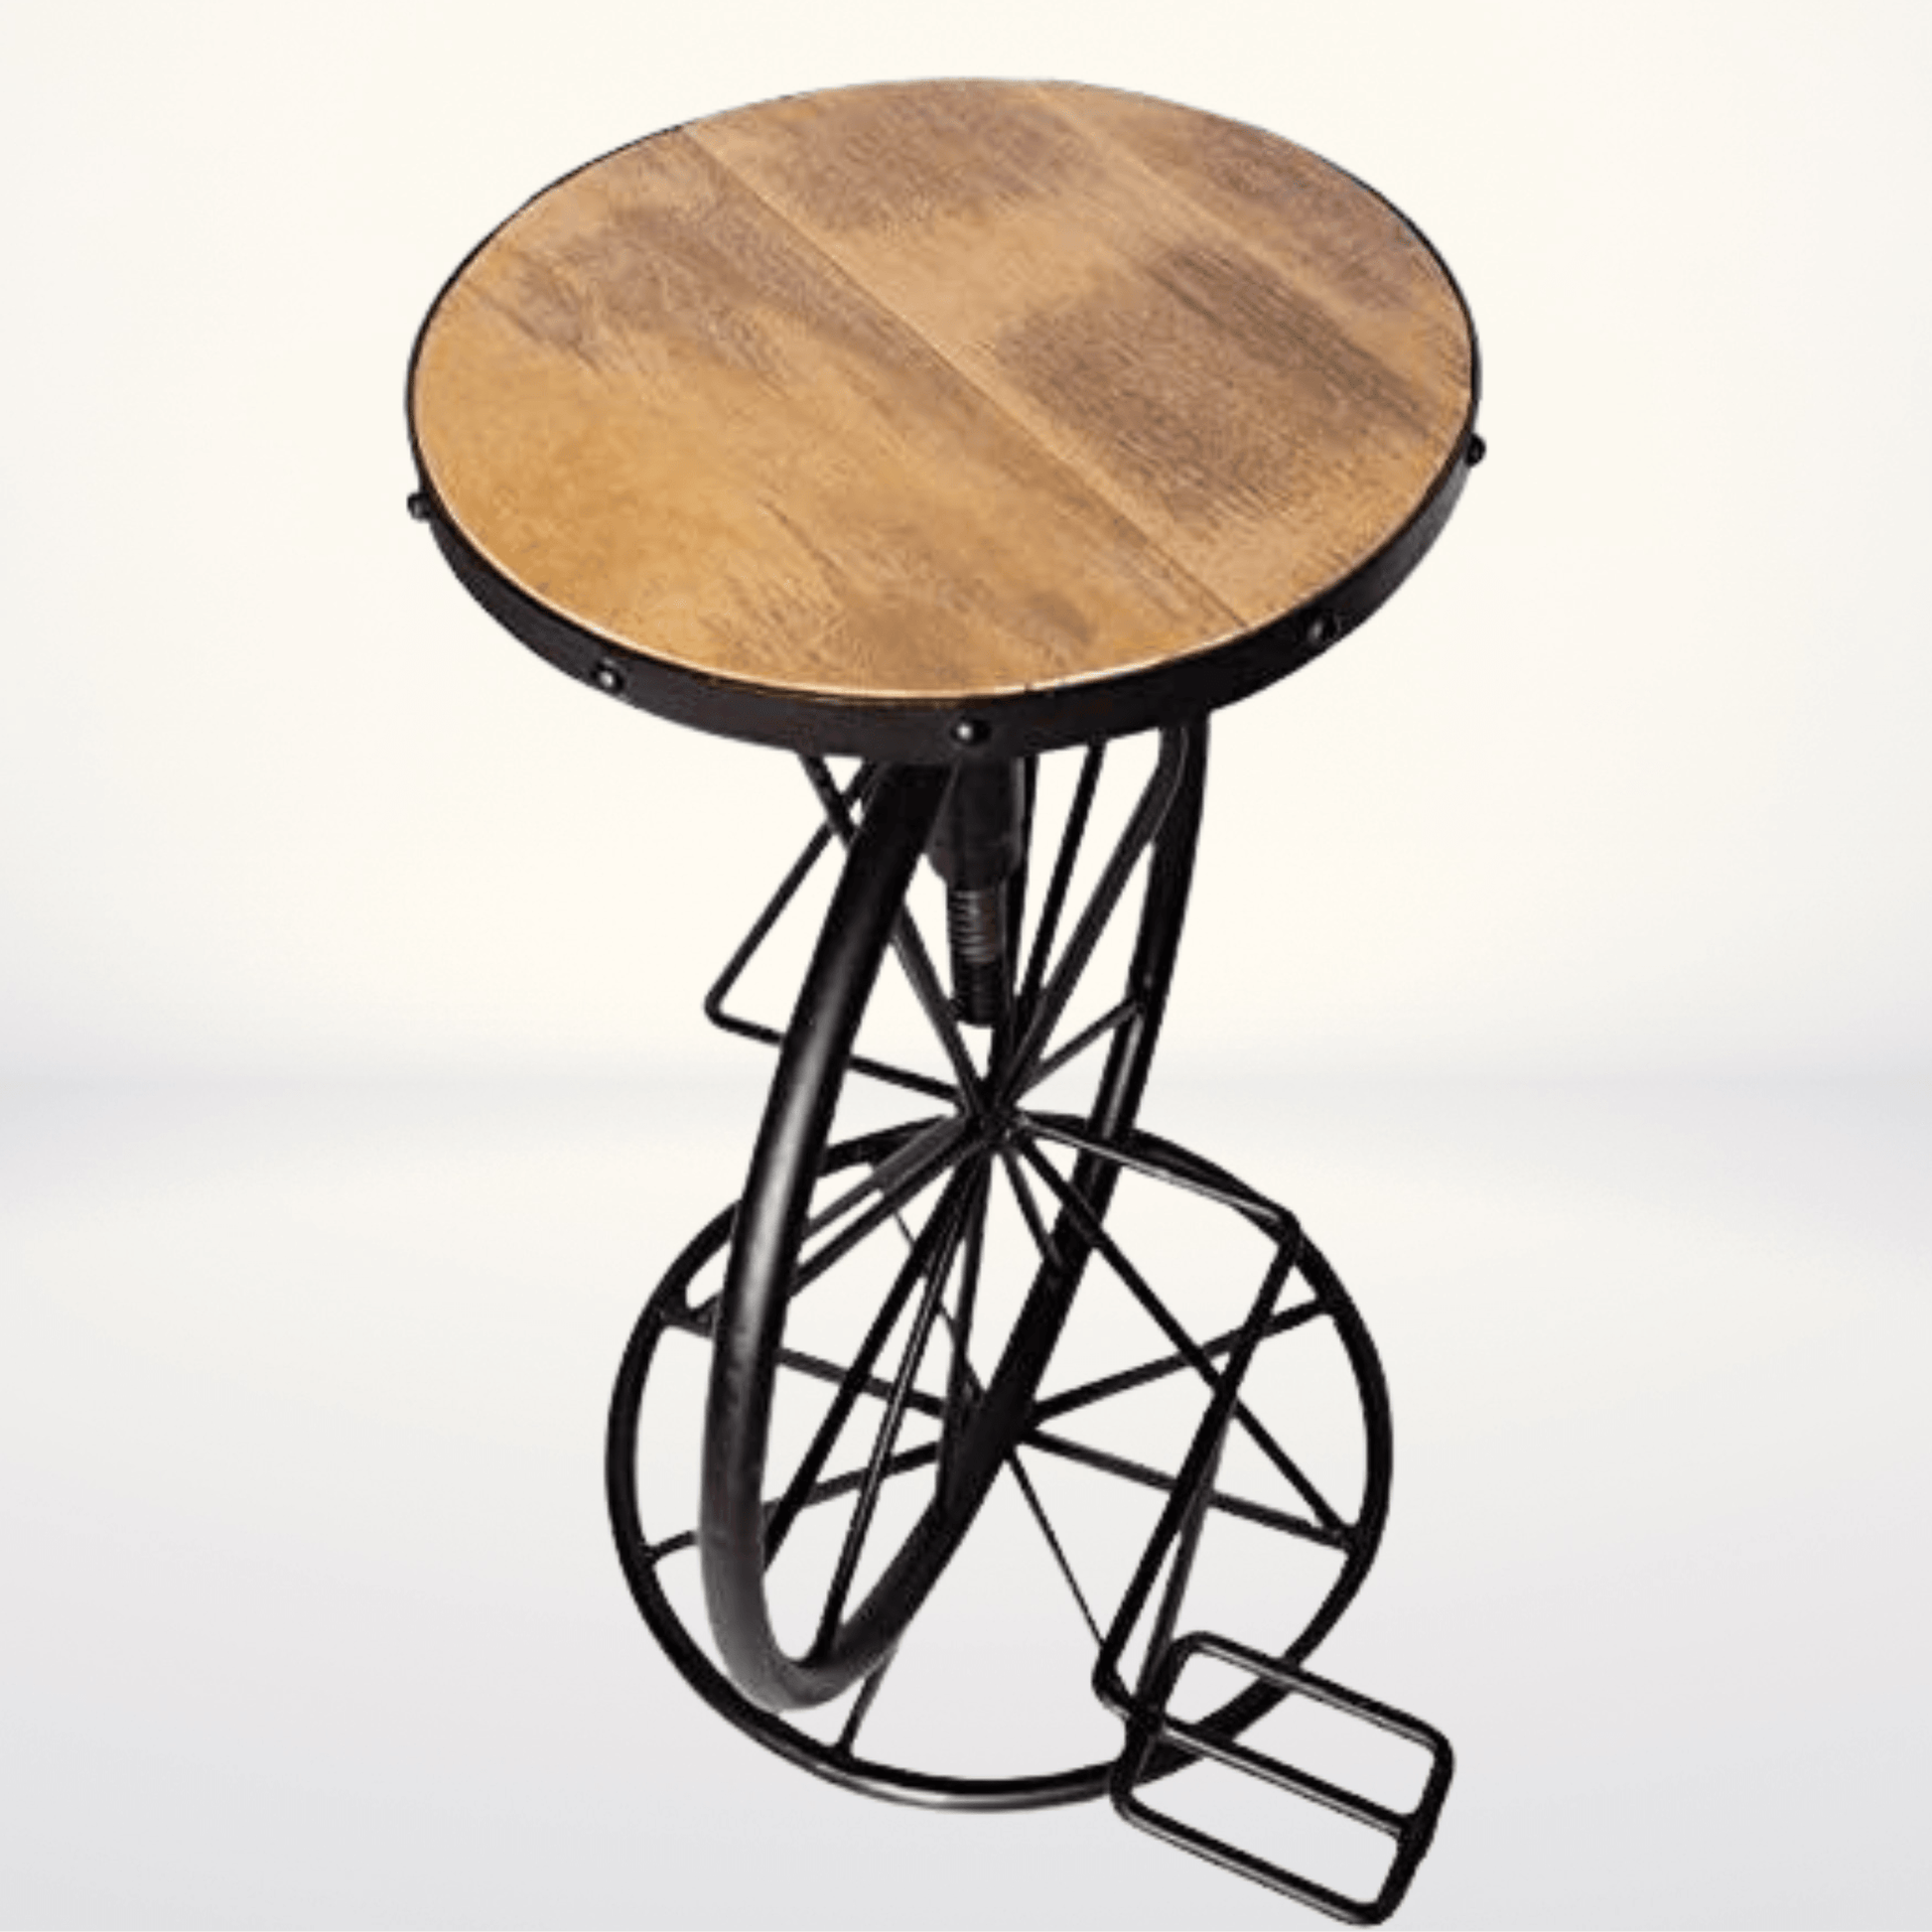 Bicycle Design Industrial Bar Stool with Adjustable Height - Stylla London